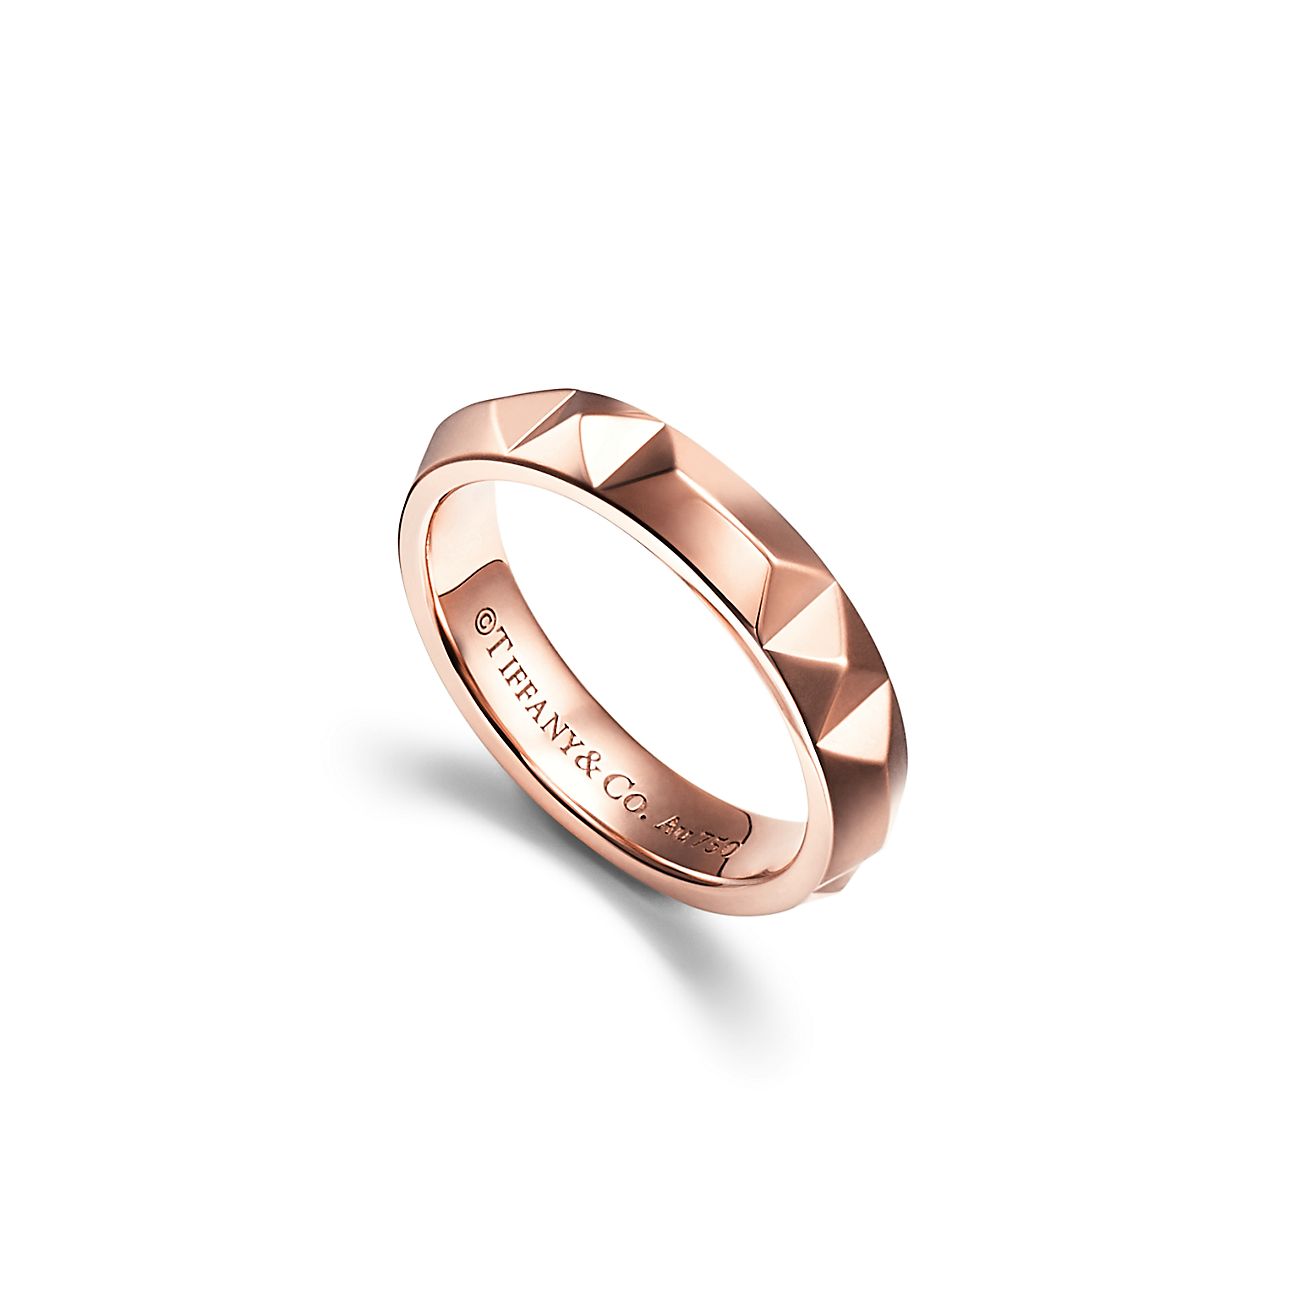 Tiffany True® Band Ring in Rose Gold, 4 mm Wide | Tiffany & Co.